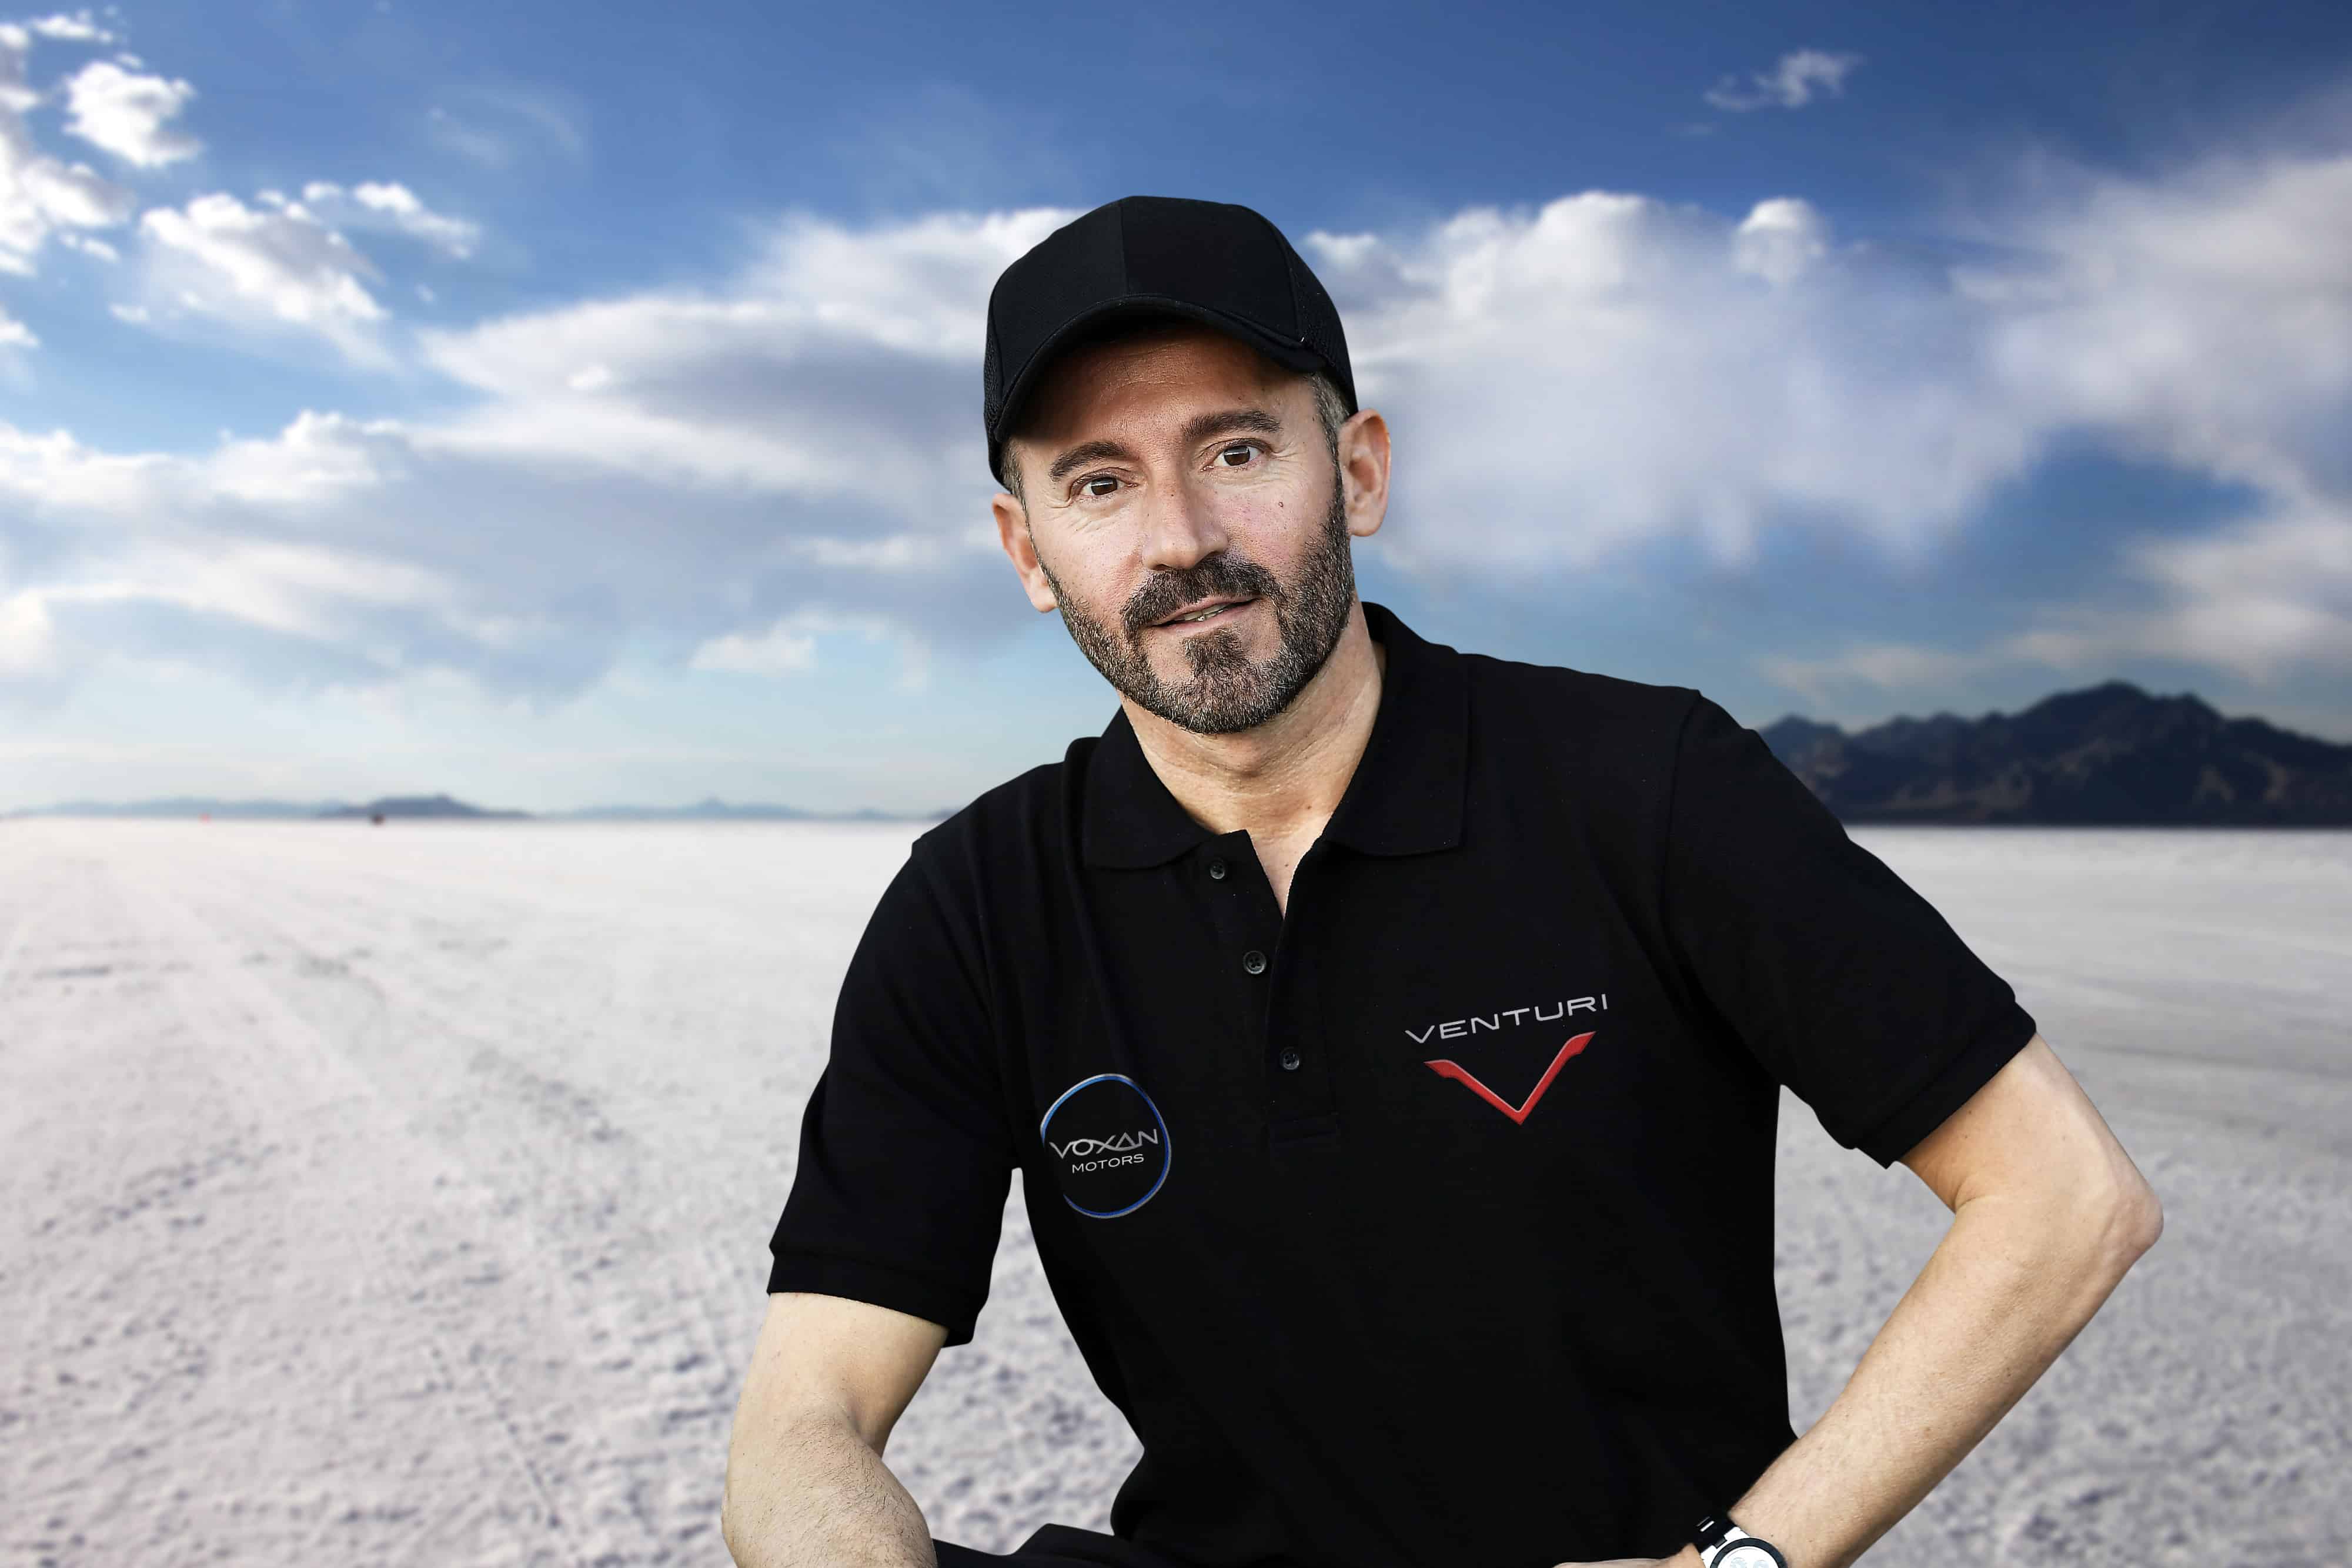 [CP] Max Biaggi and Voxan attack the world speed record on an electric motorcycle